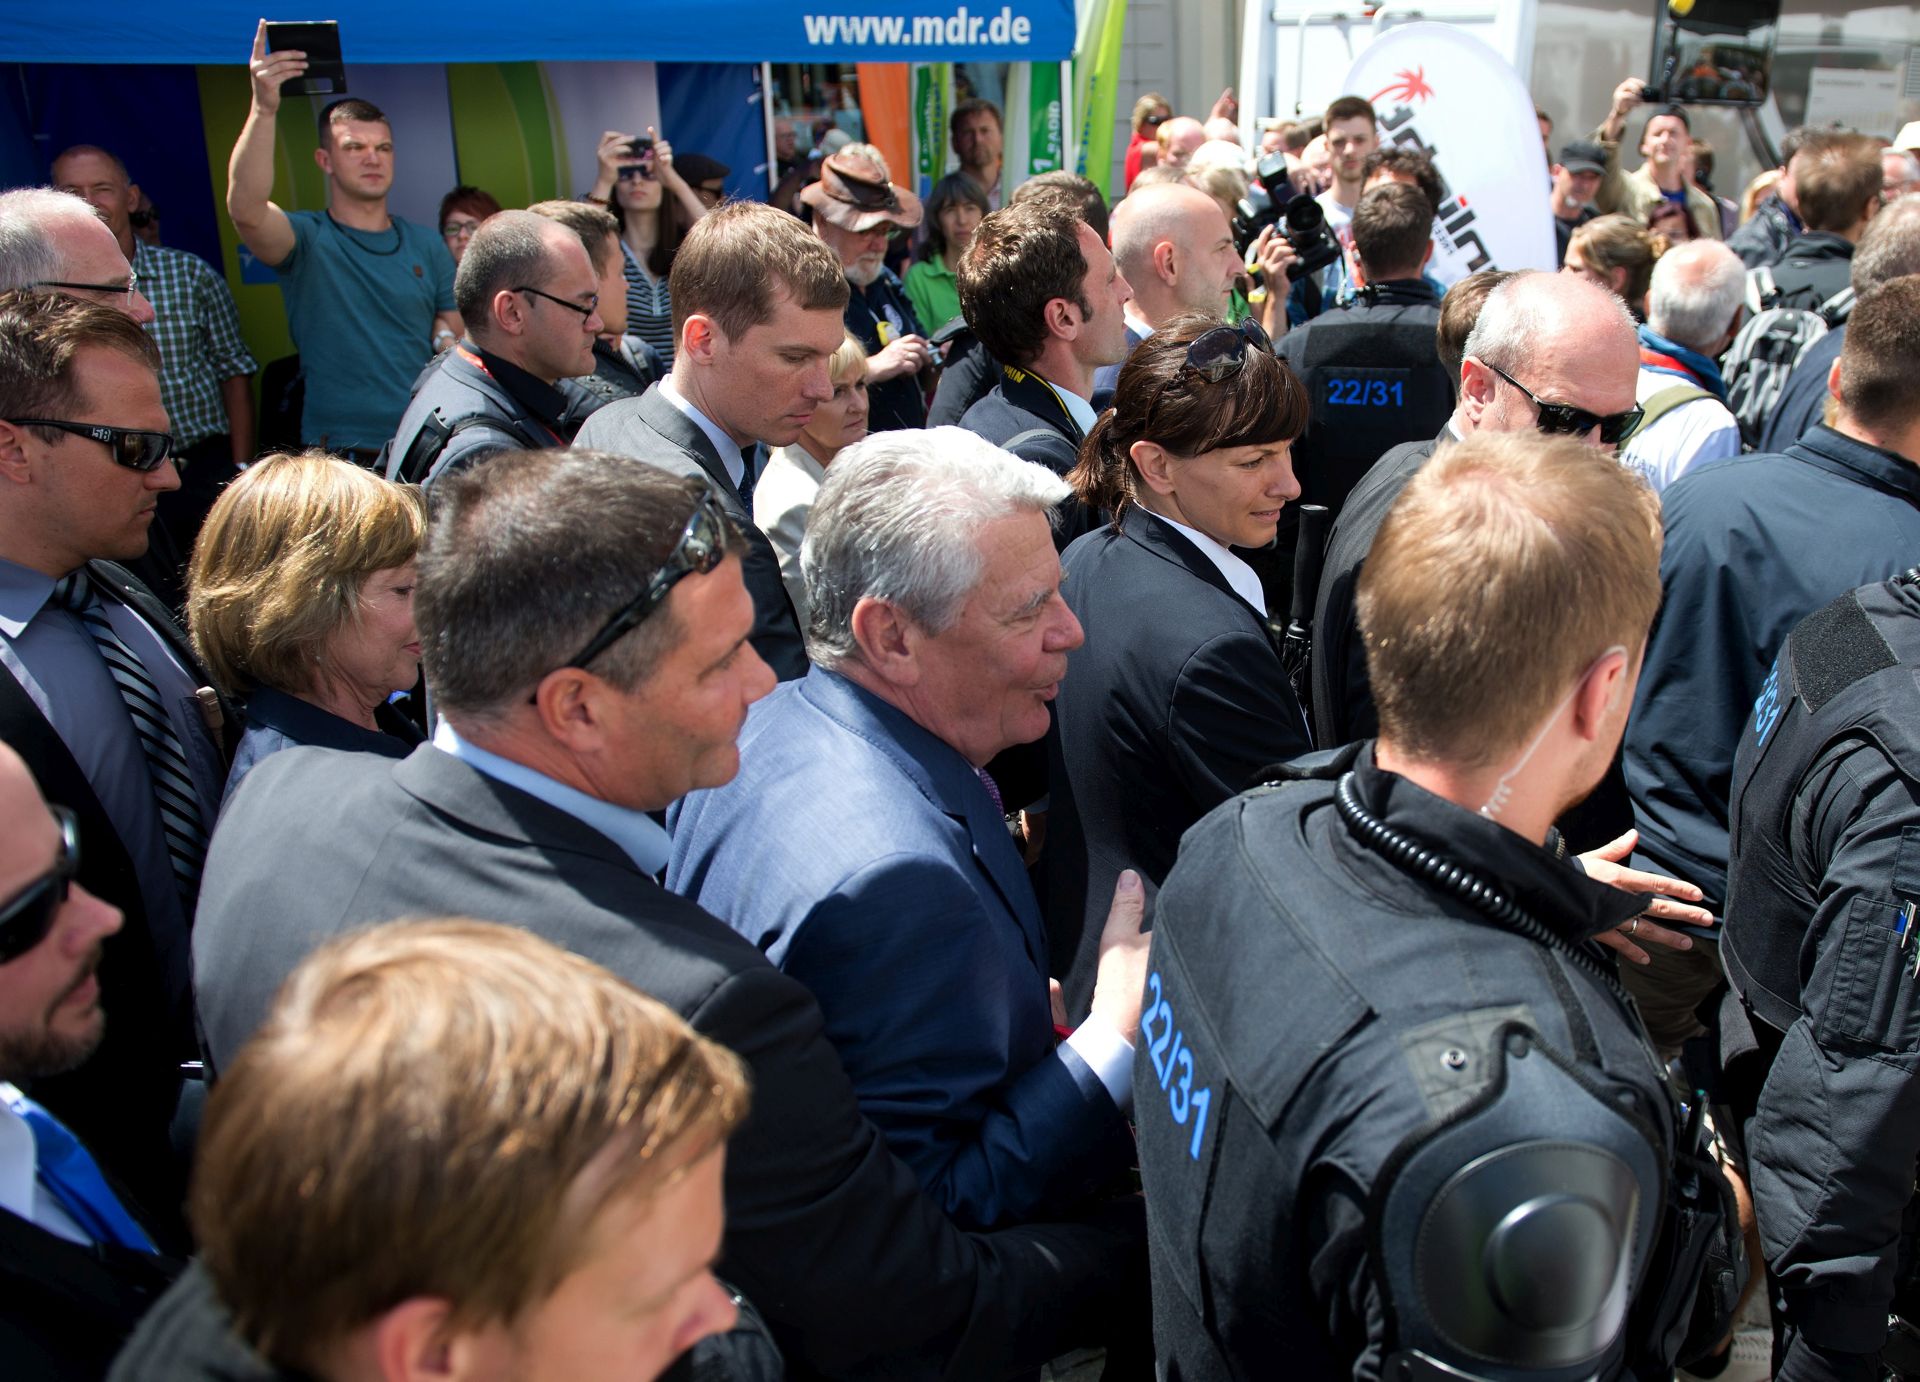 epa05391810 German President Joachim Gauck (C) is surrounded by police during his visit to the 116th German Hiking Festival on the market square in Sebnitz, Germany, 26 June 2016. Gauck was insulted by upset protesters during his visit.  EPA/ARNO BURGI